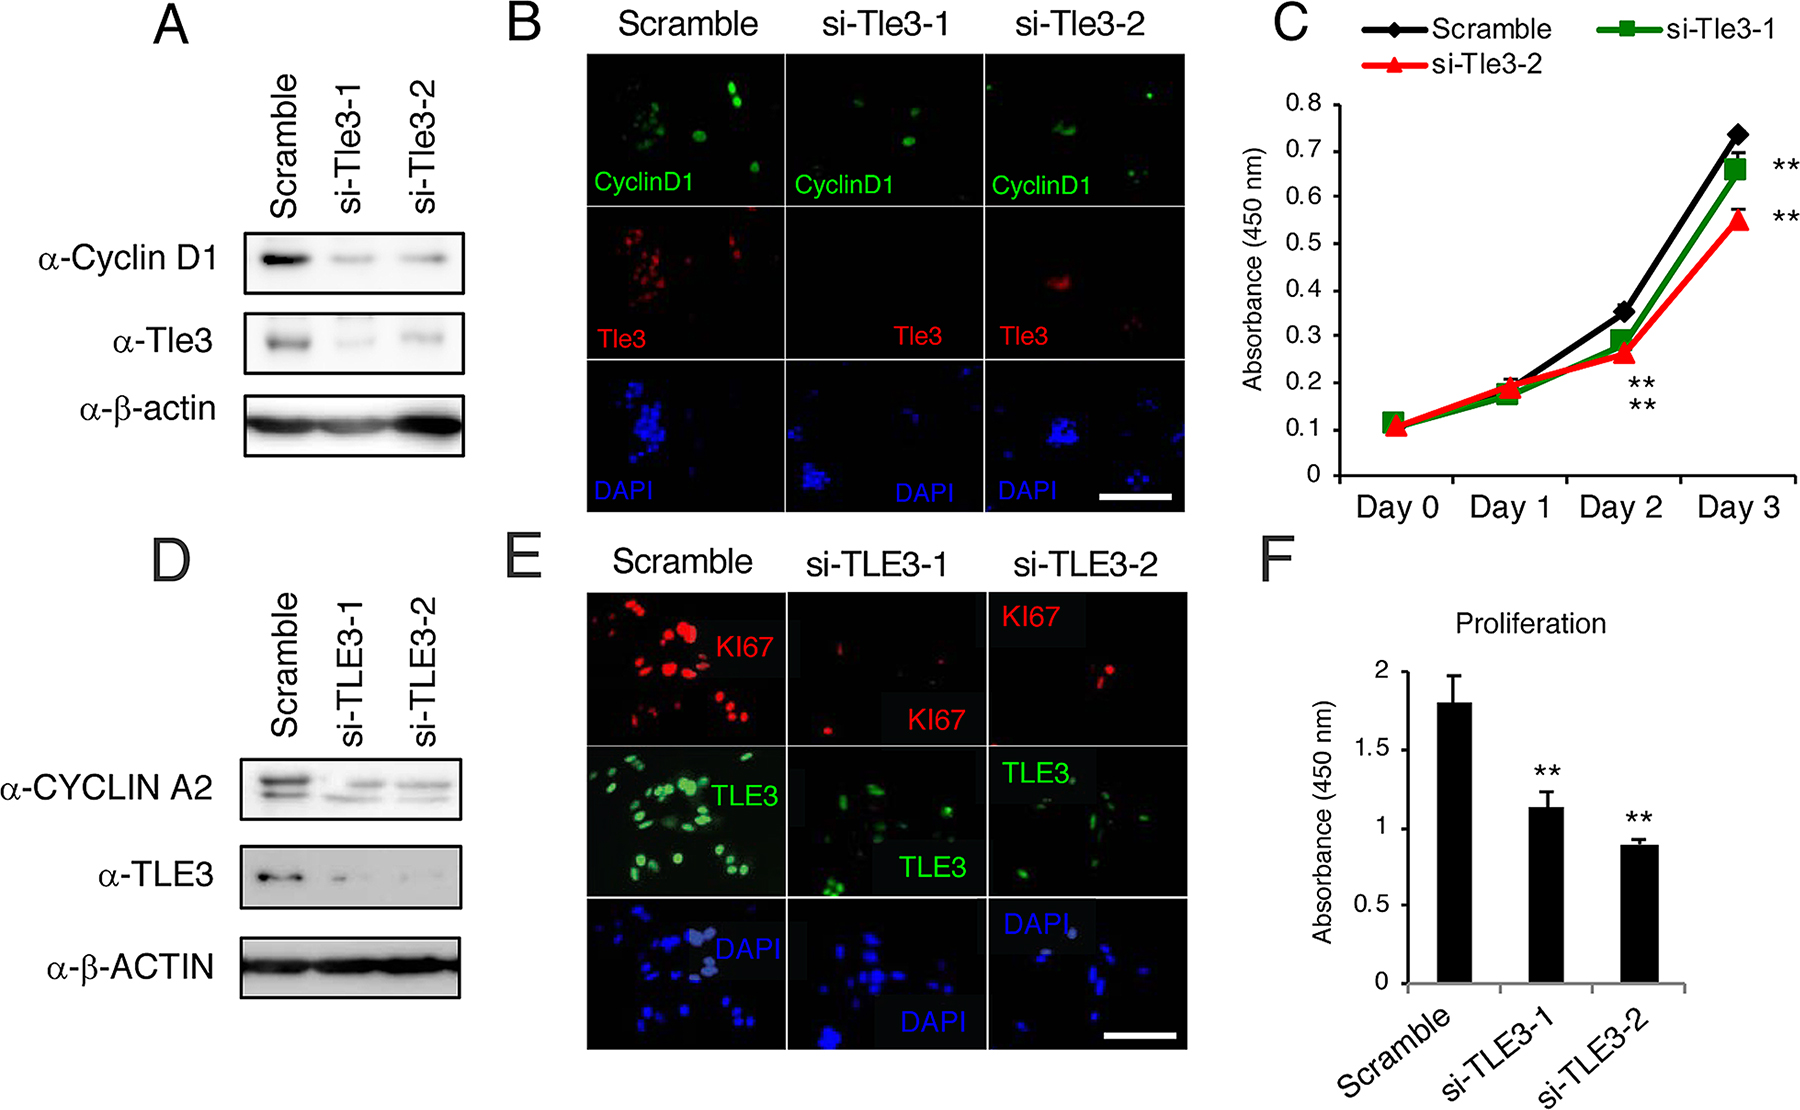 Knockdown of Tle3 (TLE3) in melanoma cells decreases proliferation.